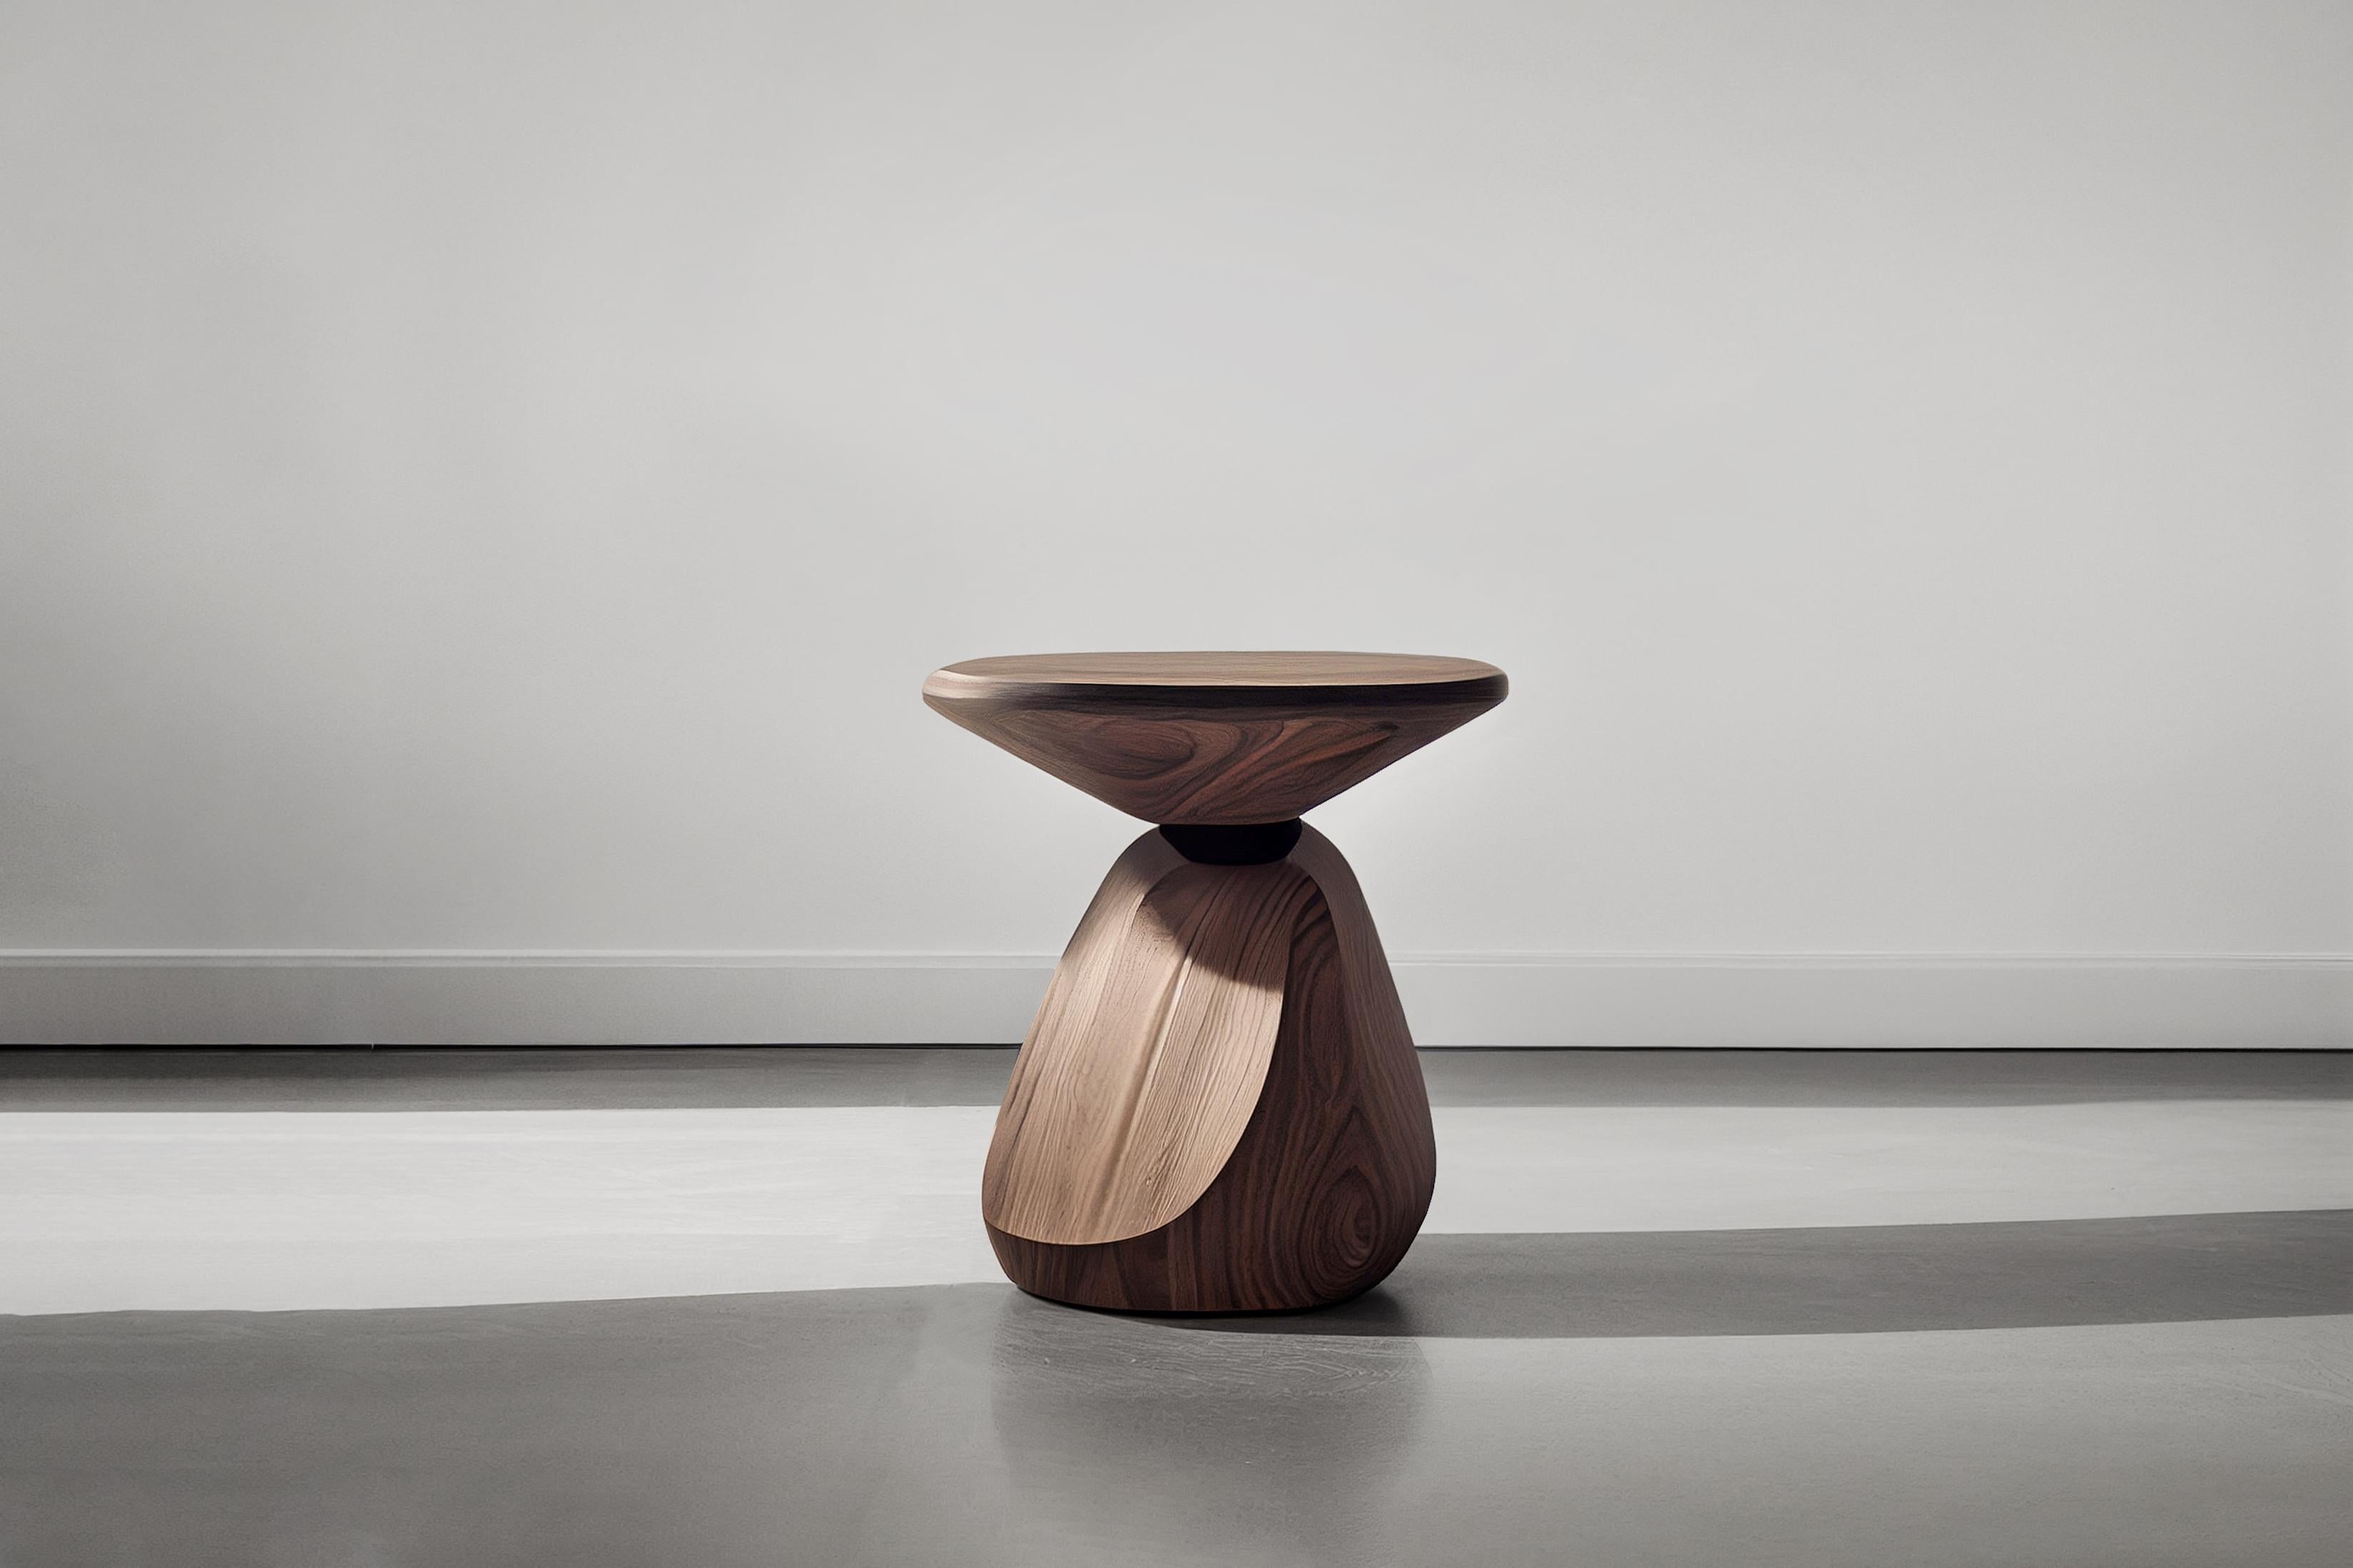 Sculptural side table made of solid walnut wood, nightstand, auxiliary table solace S4 by Joel Escalona

The Solace side table series, designed by Joel Escalona, is a furniture collection that exudes balance and presence, thanks to its sensuous,